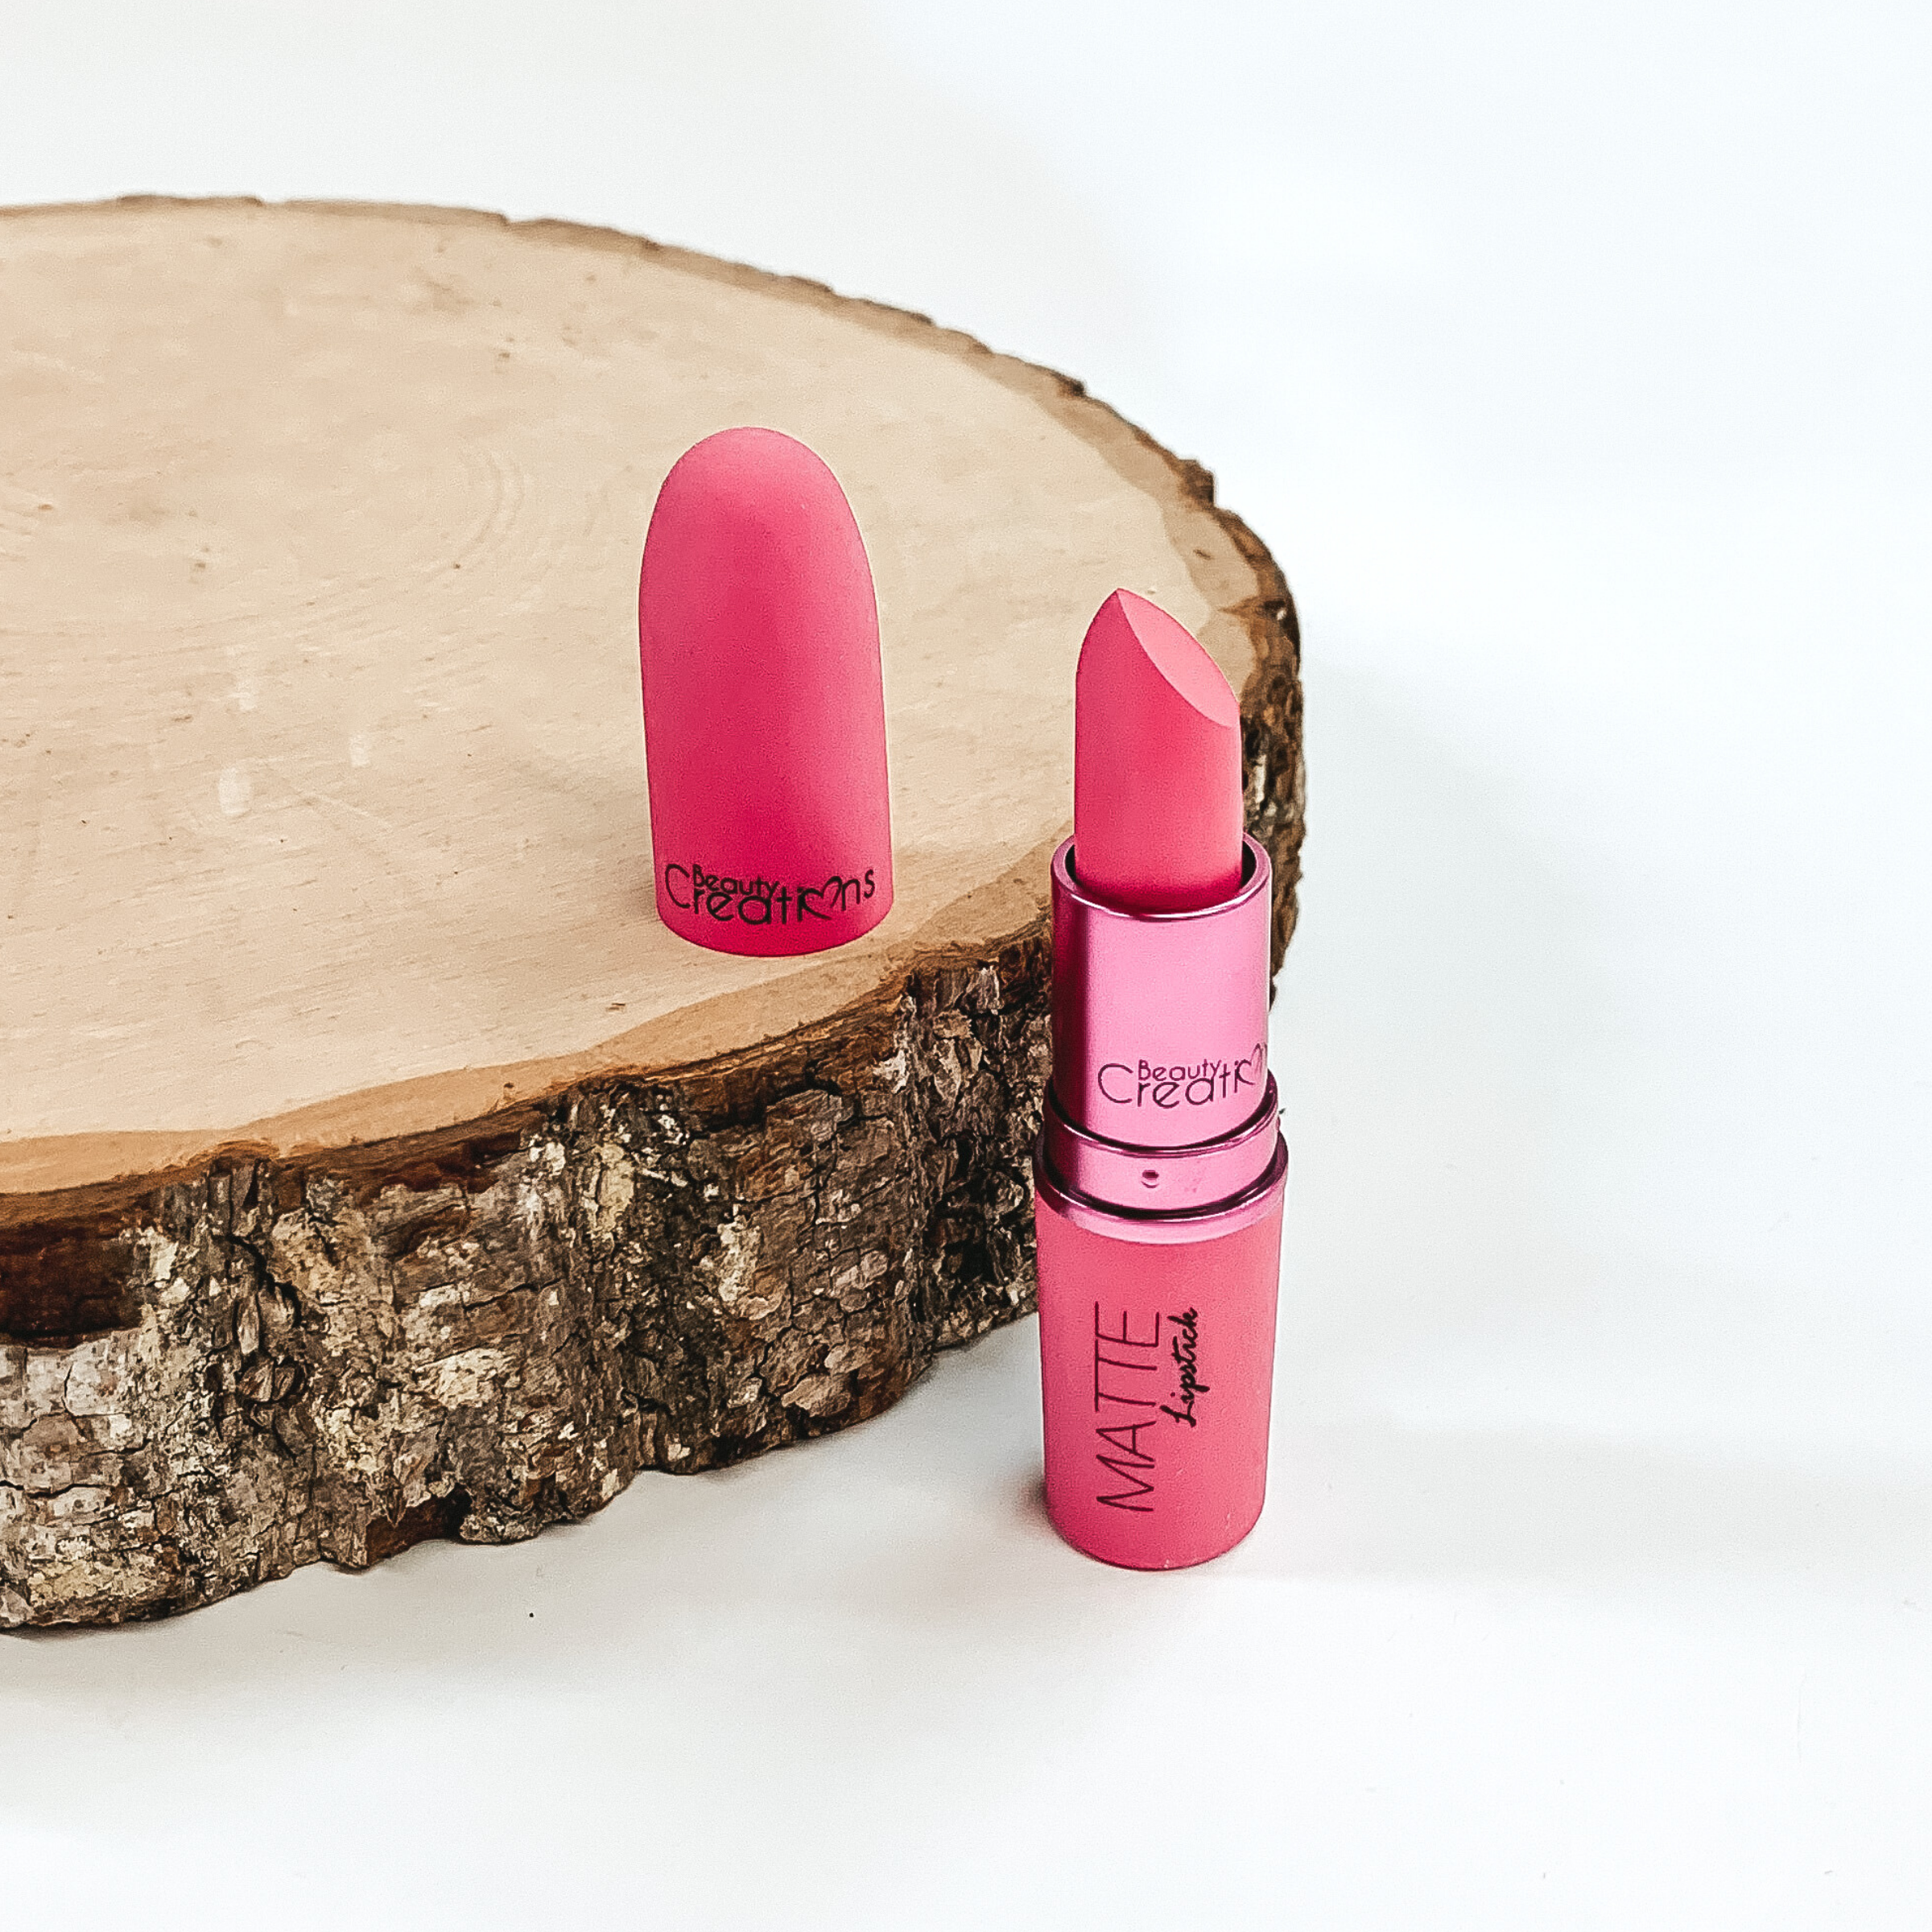 Shade pinky promise lipstick that is opened and twisted up. The tube is standing on a white background and next to it is some wood that the lid from the lipstick is placed on.